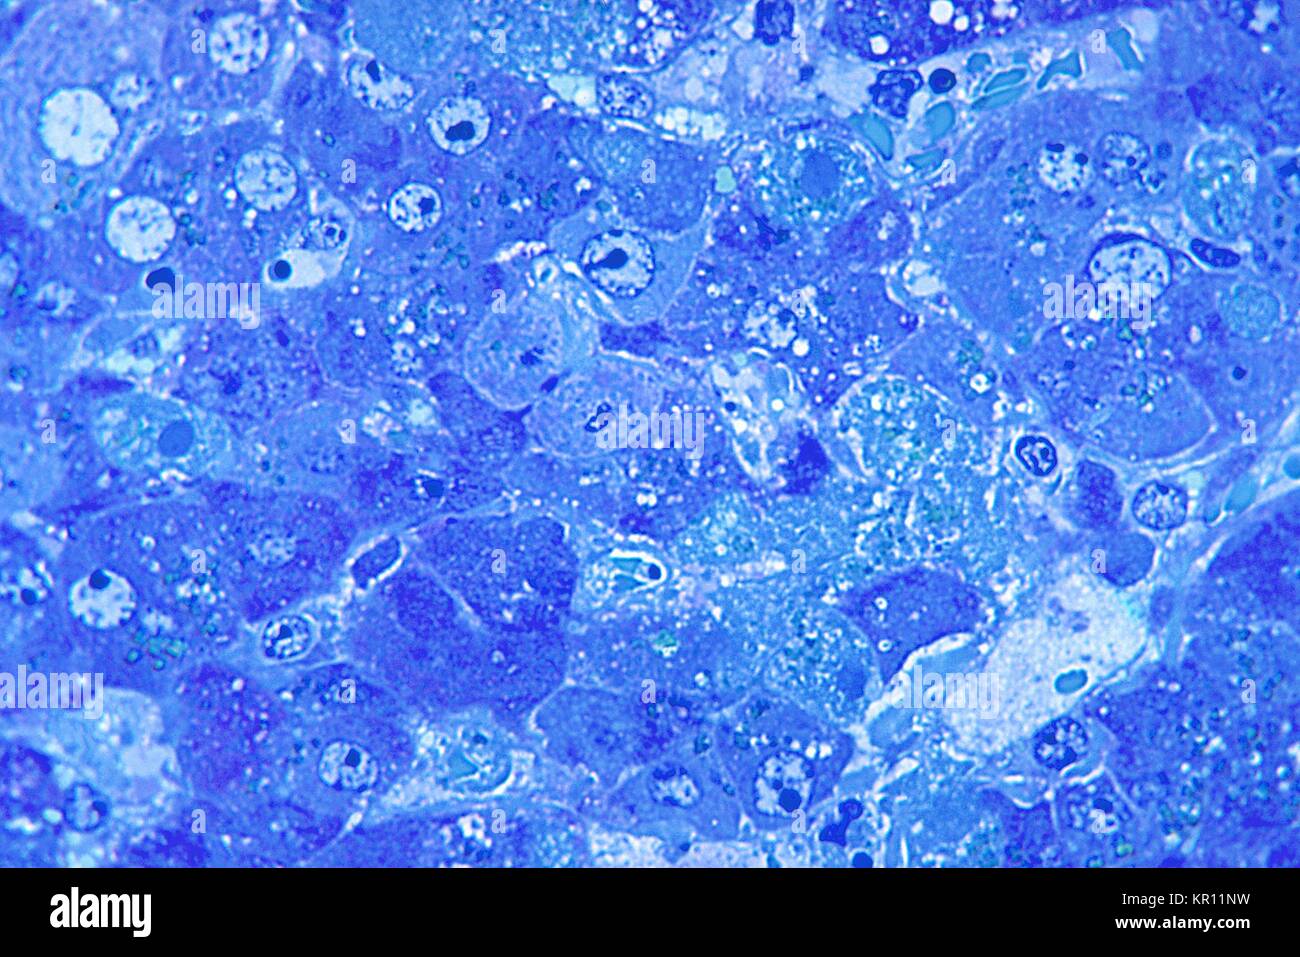 This photomicrograph shows hepatitis caused by the Lassa virus, using toluidine-blue azure II stain, 1972. The Lassa virus, which can cause altered liver morphology with hemorrhagic necrosis and inflammation, is a member of the family Arenaviridae, and is a single-stranded RNA, zoonotic, or animal-borne pathogen. Image courtesy CDC/Dr. W. Winn. Stock Photo